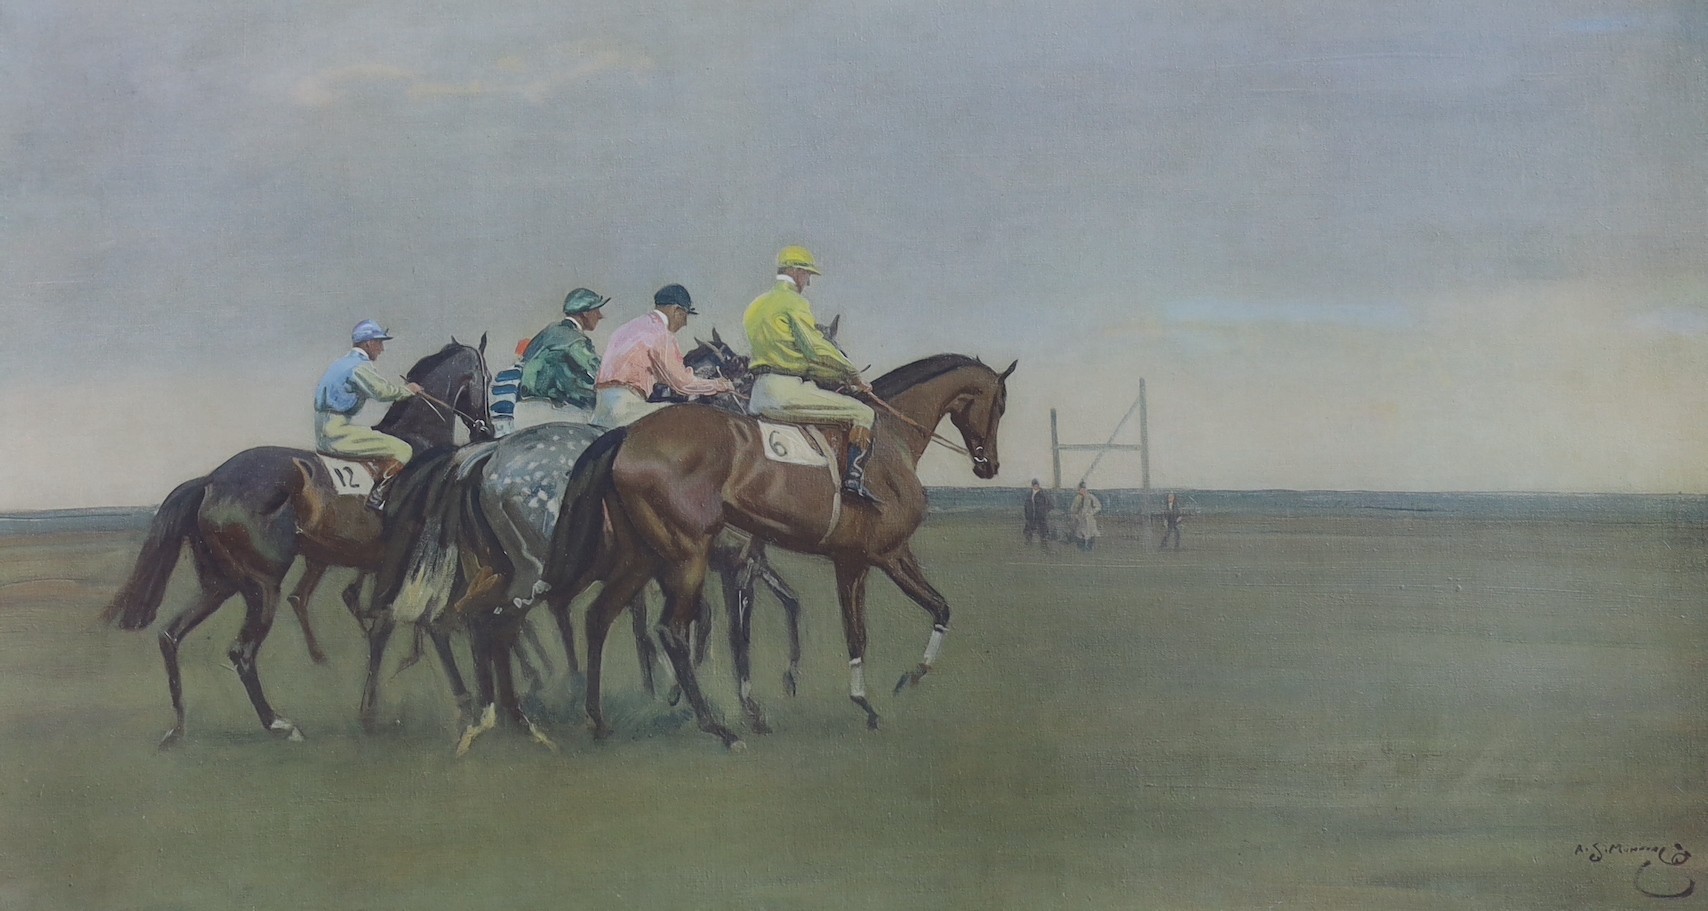 After Alfred Munnings, a coloured print, 